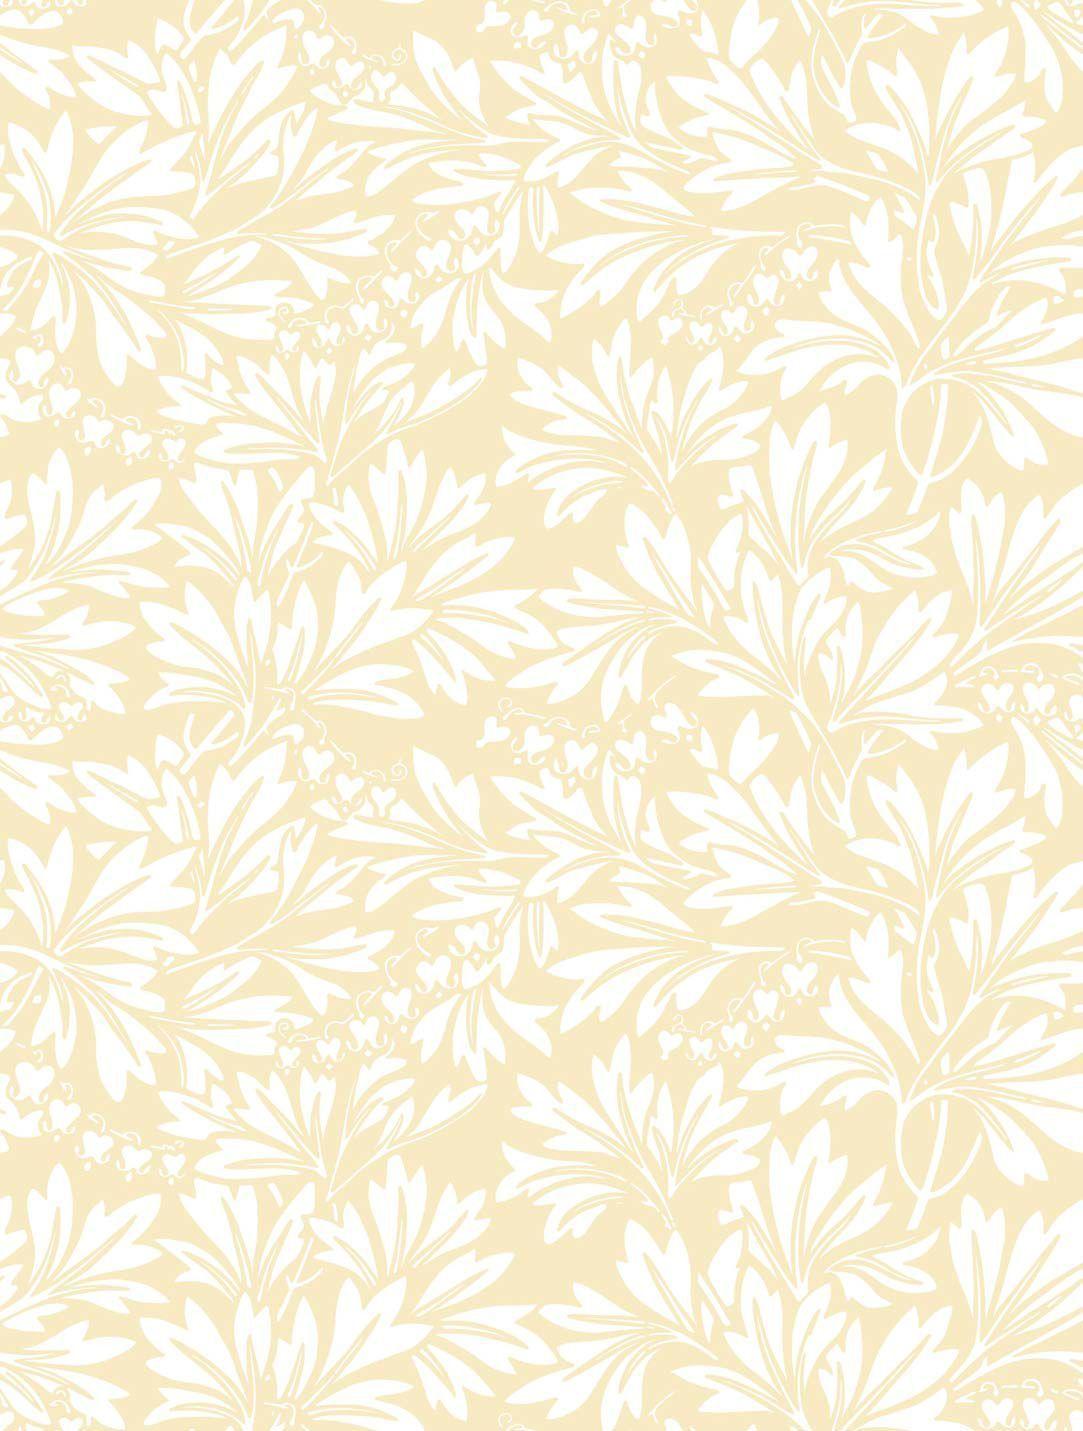 Damask Tiled Classic Wallpaper Textile Or Fabric Print Pattern Traditional  Vector Design With Floral Motif Stock Illustration  Download Image Now   iStock